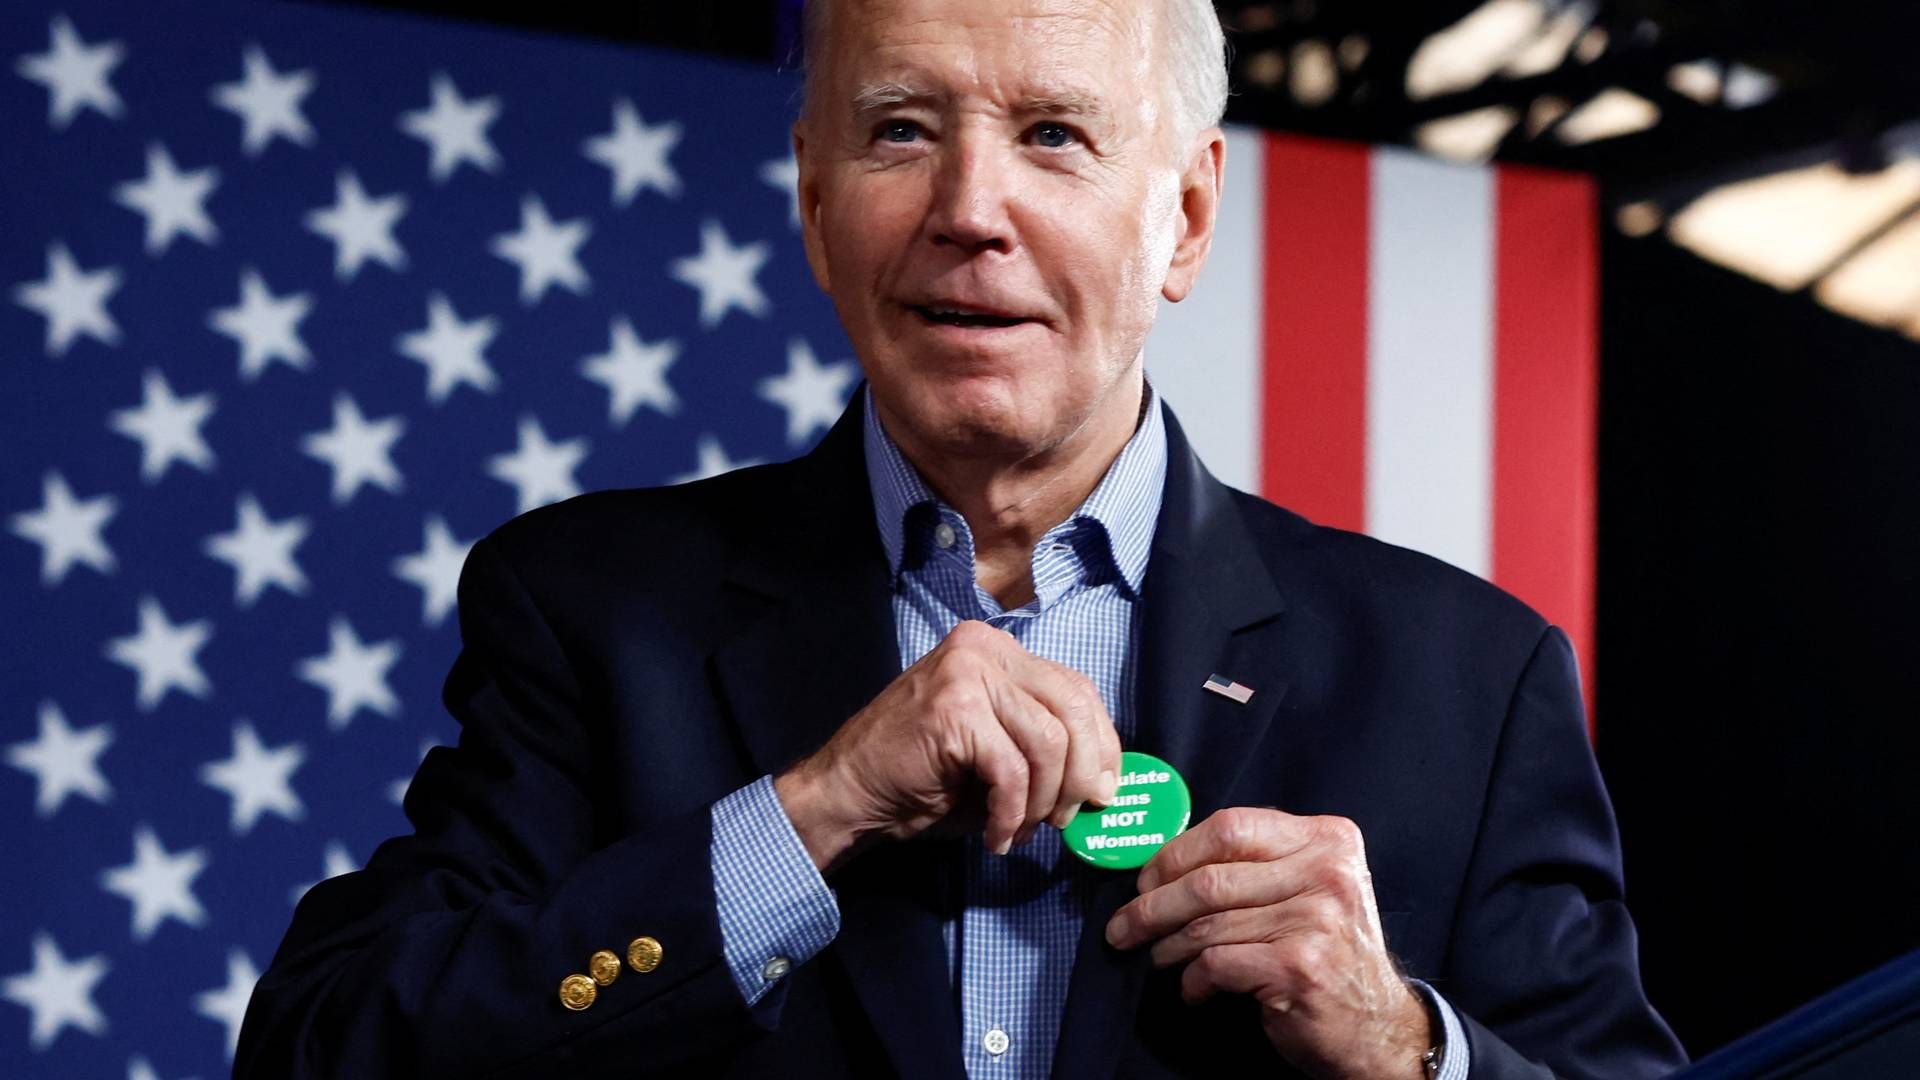 US President Joe Biden puts on a badge that reads "Regulate guns not women" during a campaign event at Pullman Yards in Atlanta in March. | Photo: Evelyn Hockstein